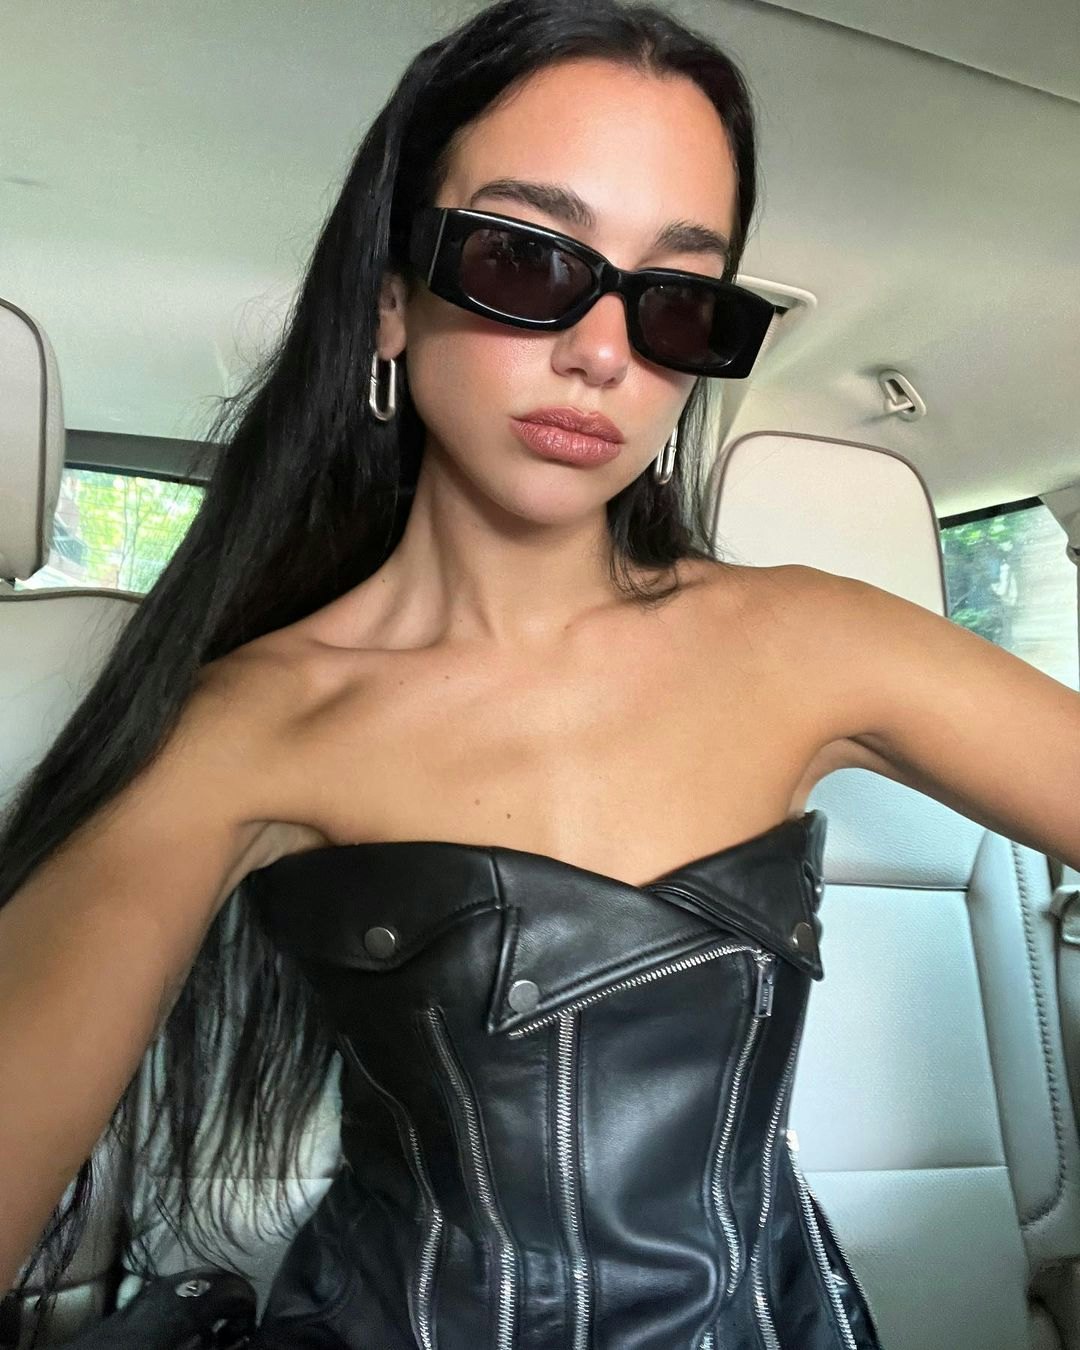 Dua Lipa's black leather strapless top is actually just belts